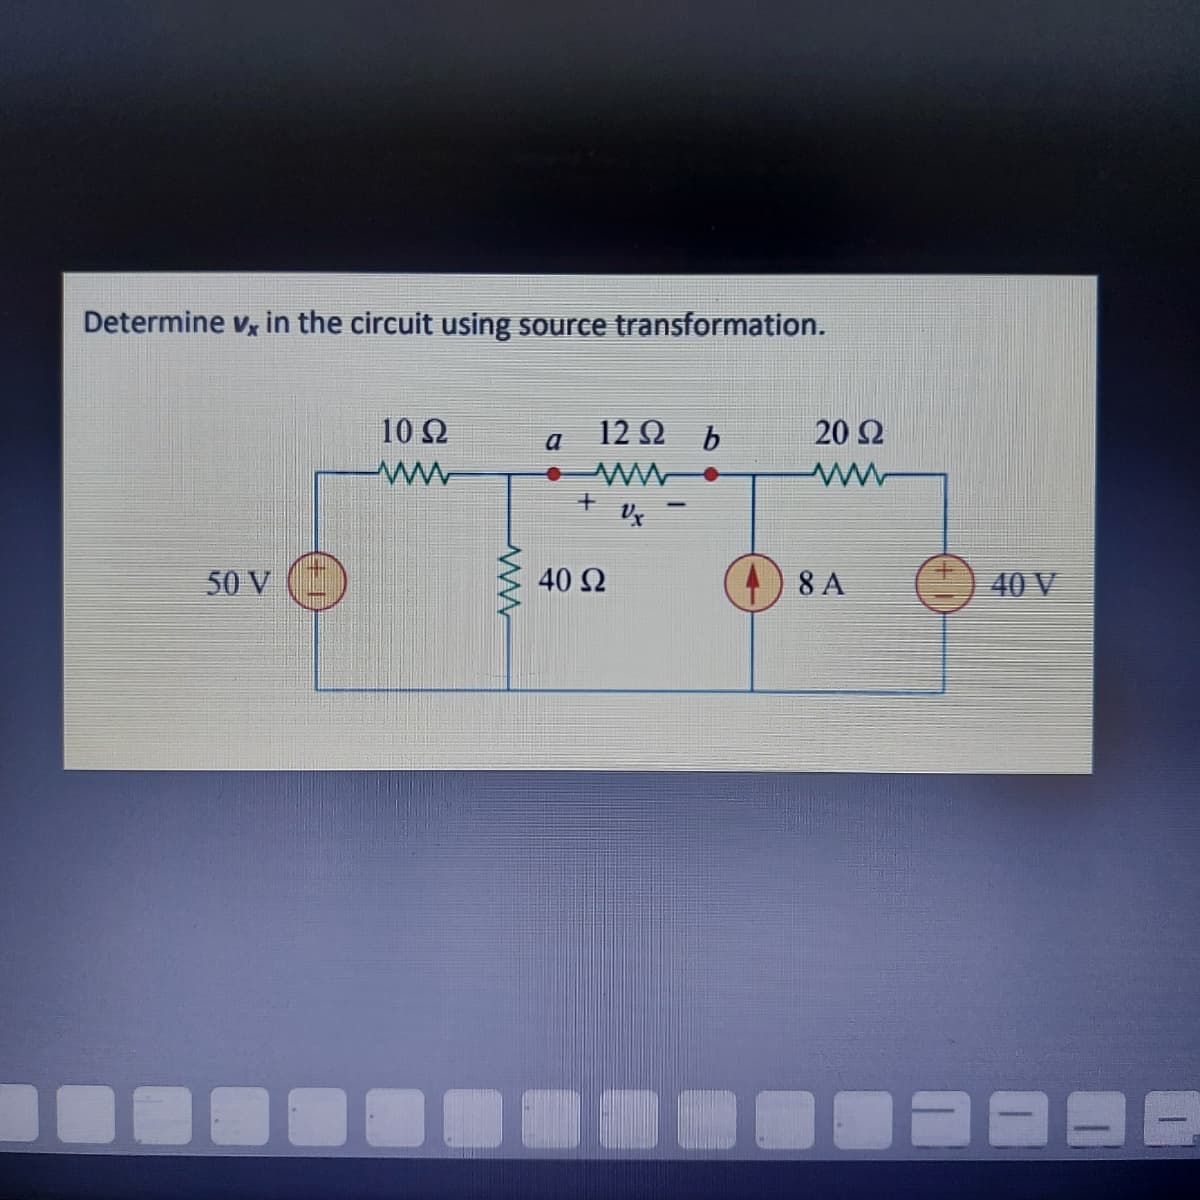 Determine v, in the circuit using source transformation.
10 2
12 2 b
20 2
a
50 V
40 2
8 A
40 V
